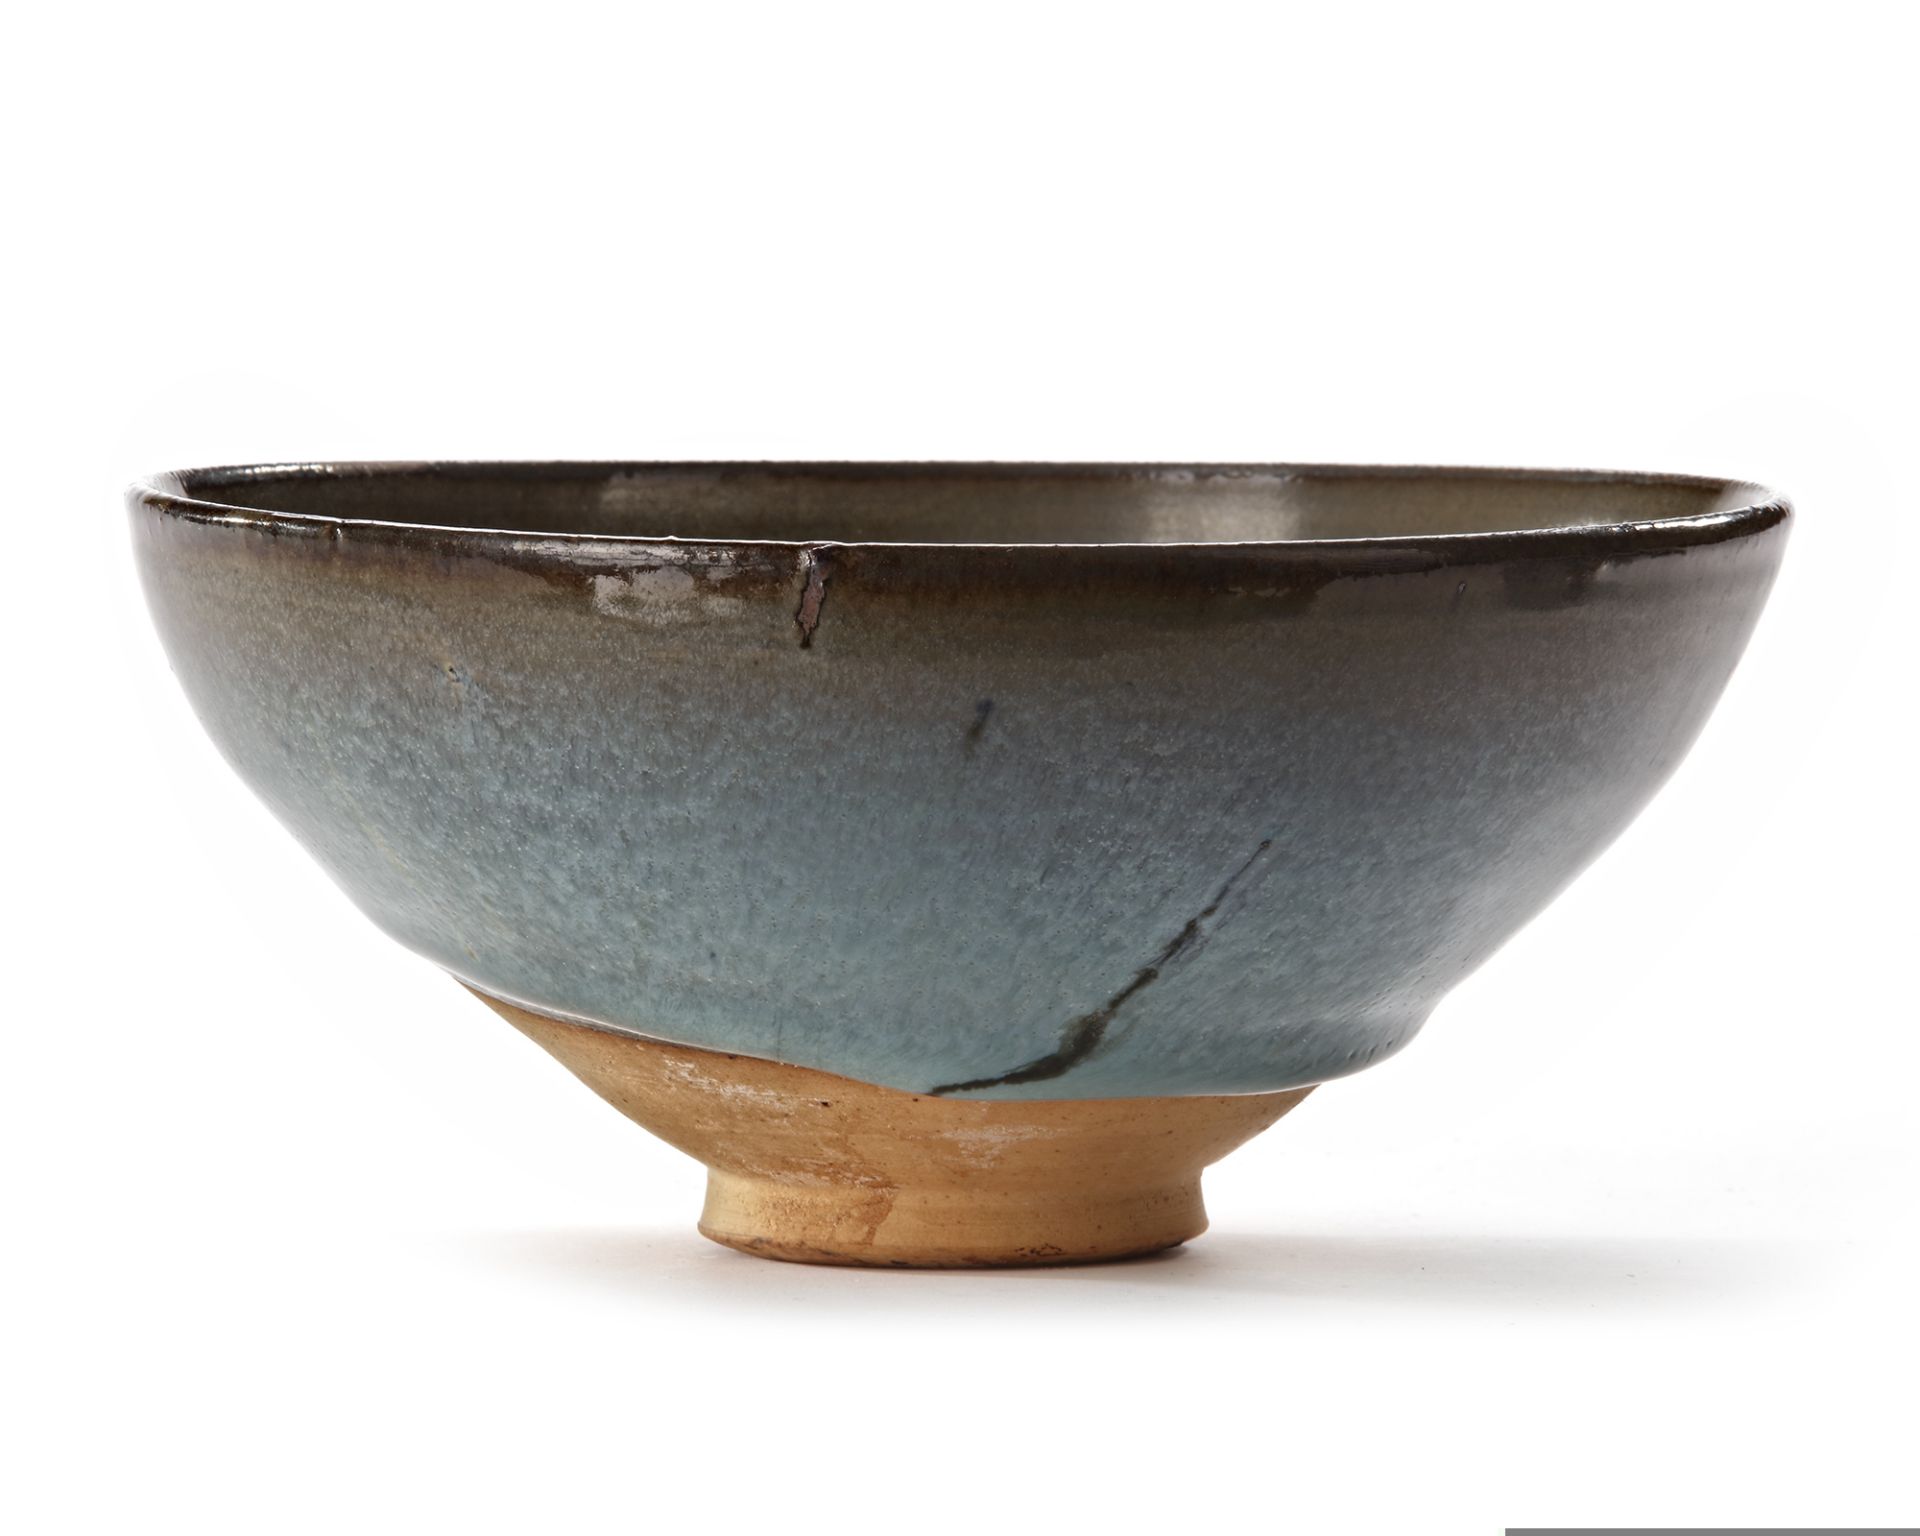 A CHINESE JUNYAO PURPLE-SPLASHED CONICAL BOWL, YUAN DYNASTY (1279-1368) - Image 2 of 4